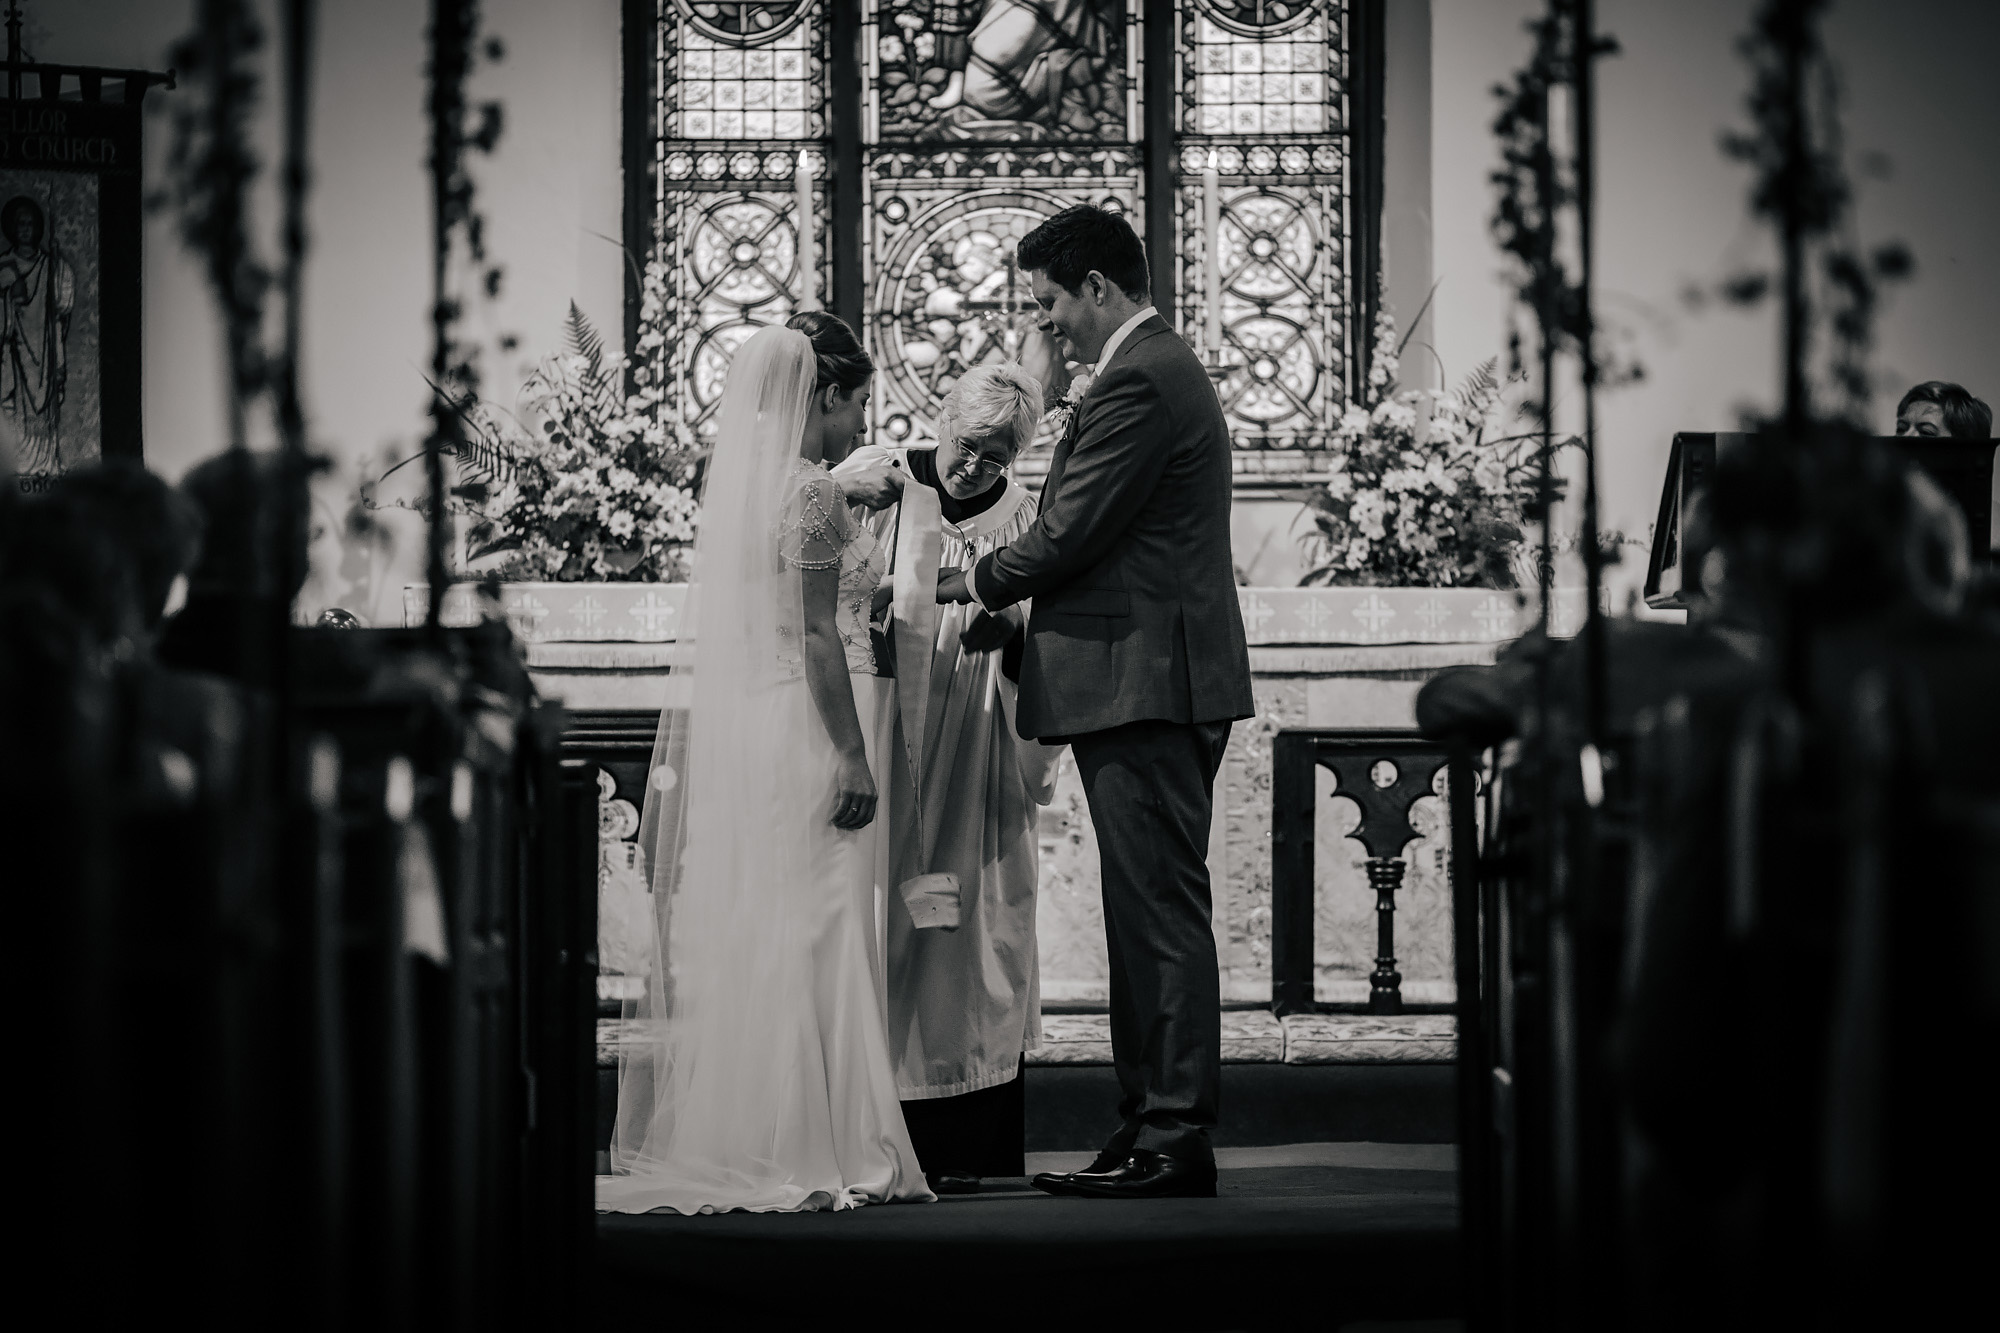 Vicar tying hands of the bride and groom during the wedding ceremony